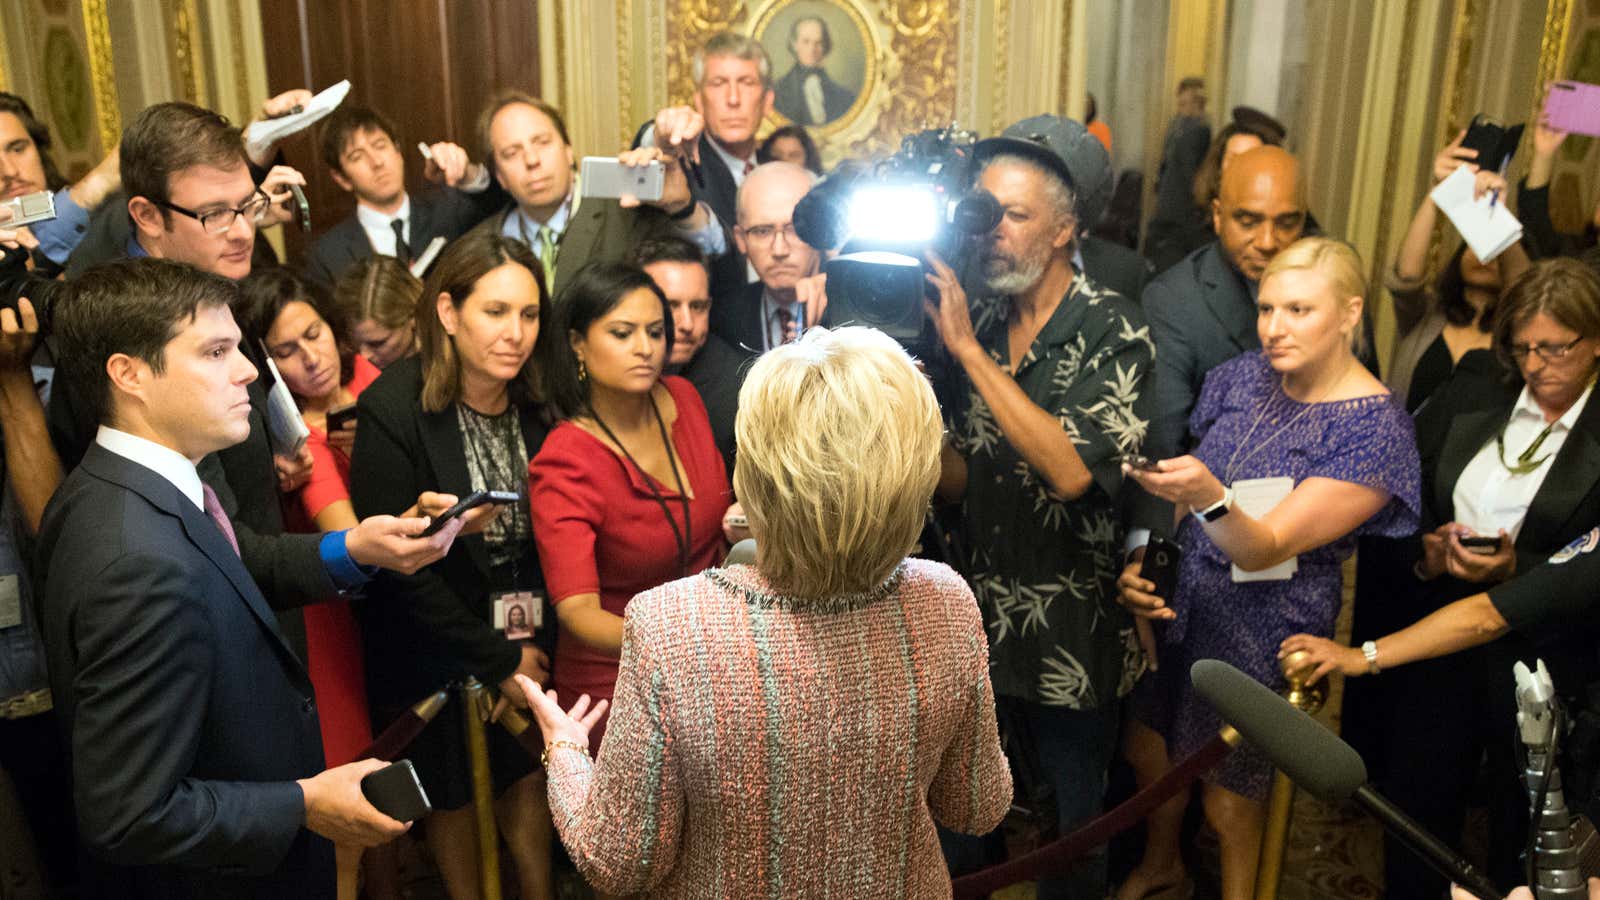 Hillary Clinton speaks to reporters in July 2016, but it’s not a press conference.